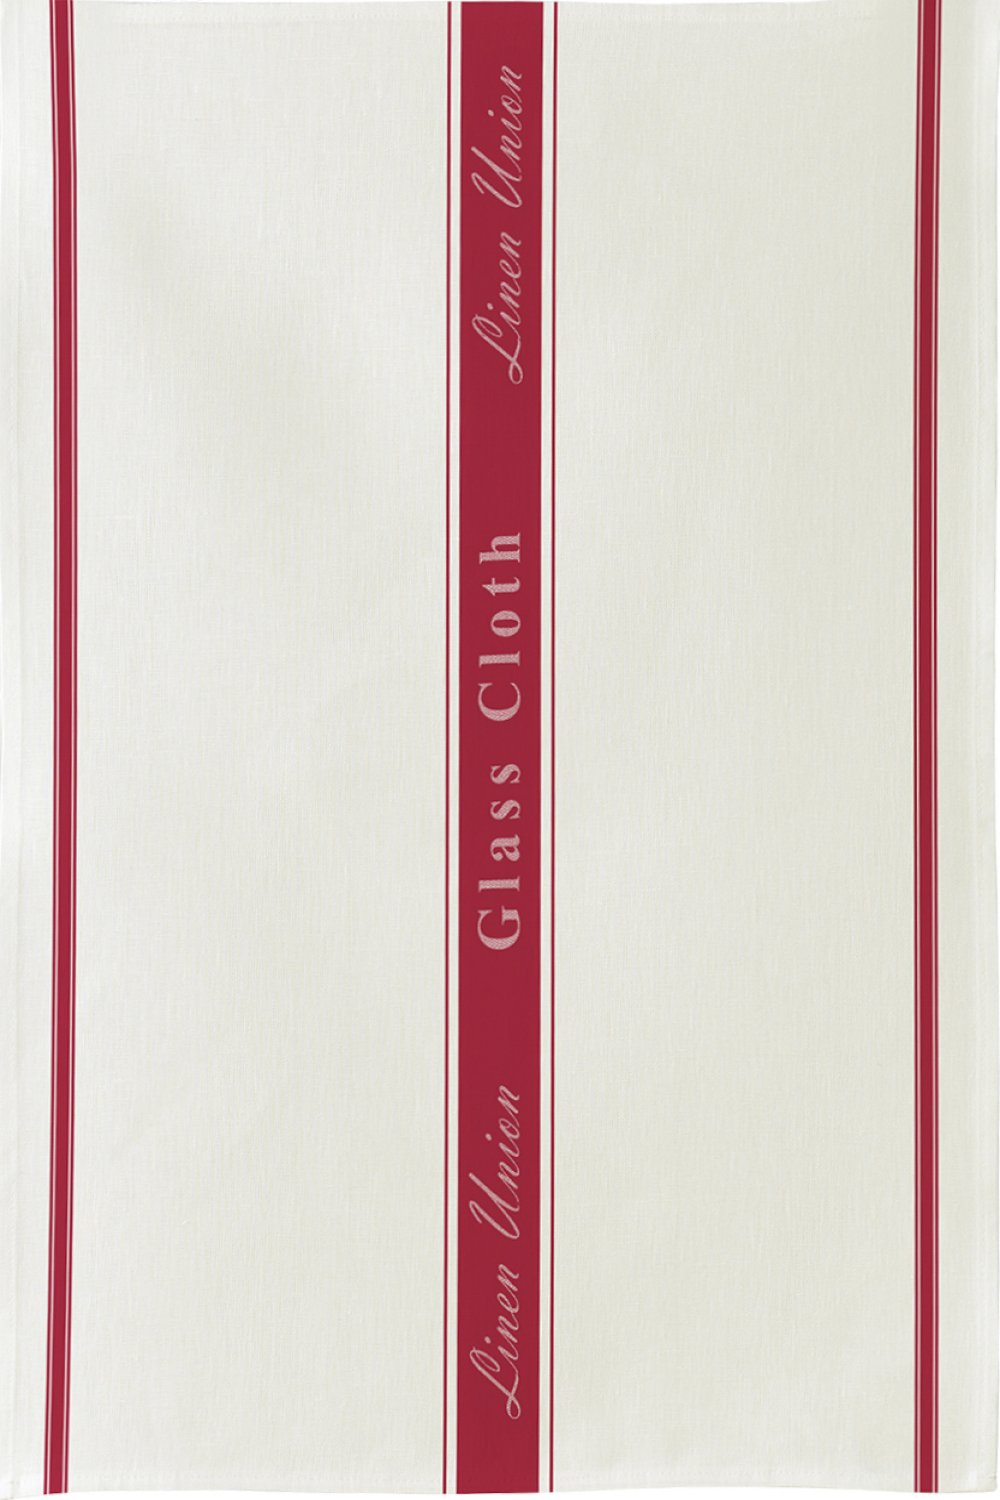 Ulster Weavers, "Glass Cloth Red", Woven linen and cotton union